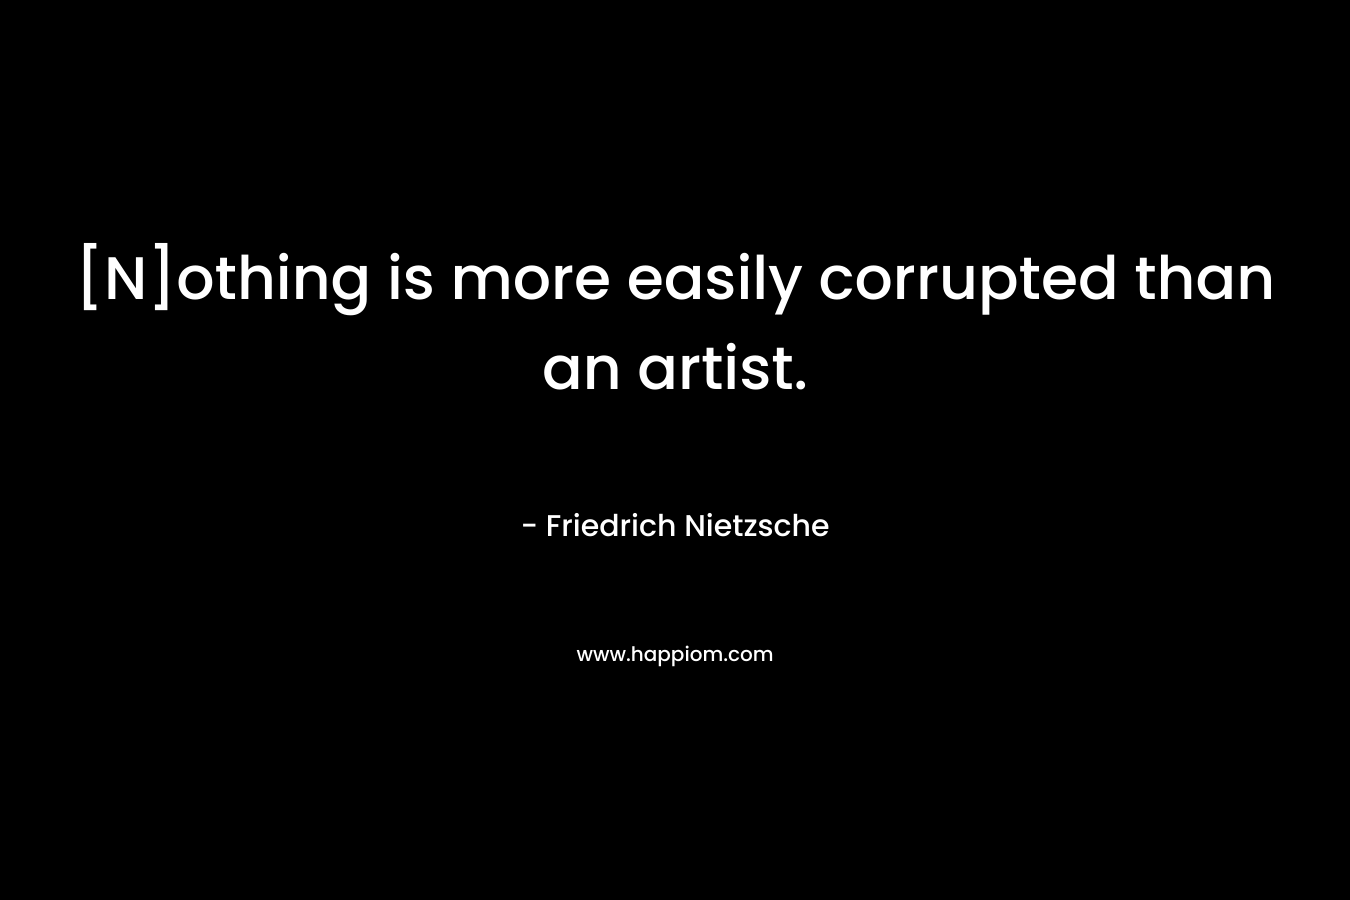 [N]othing is more easily corrupted than an artist.